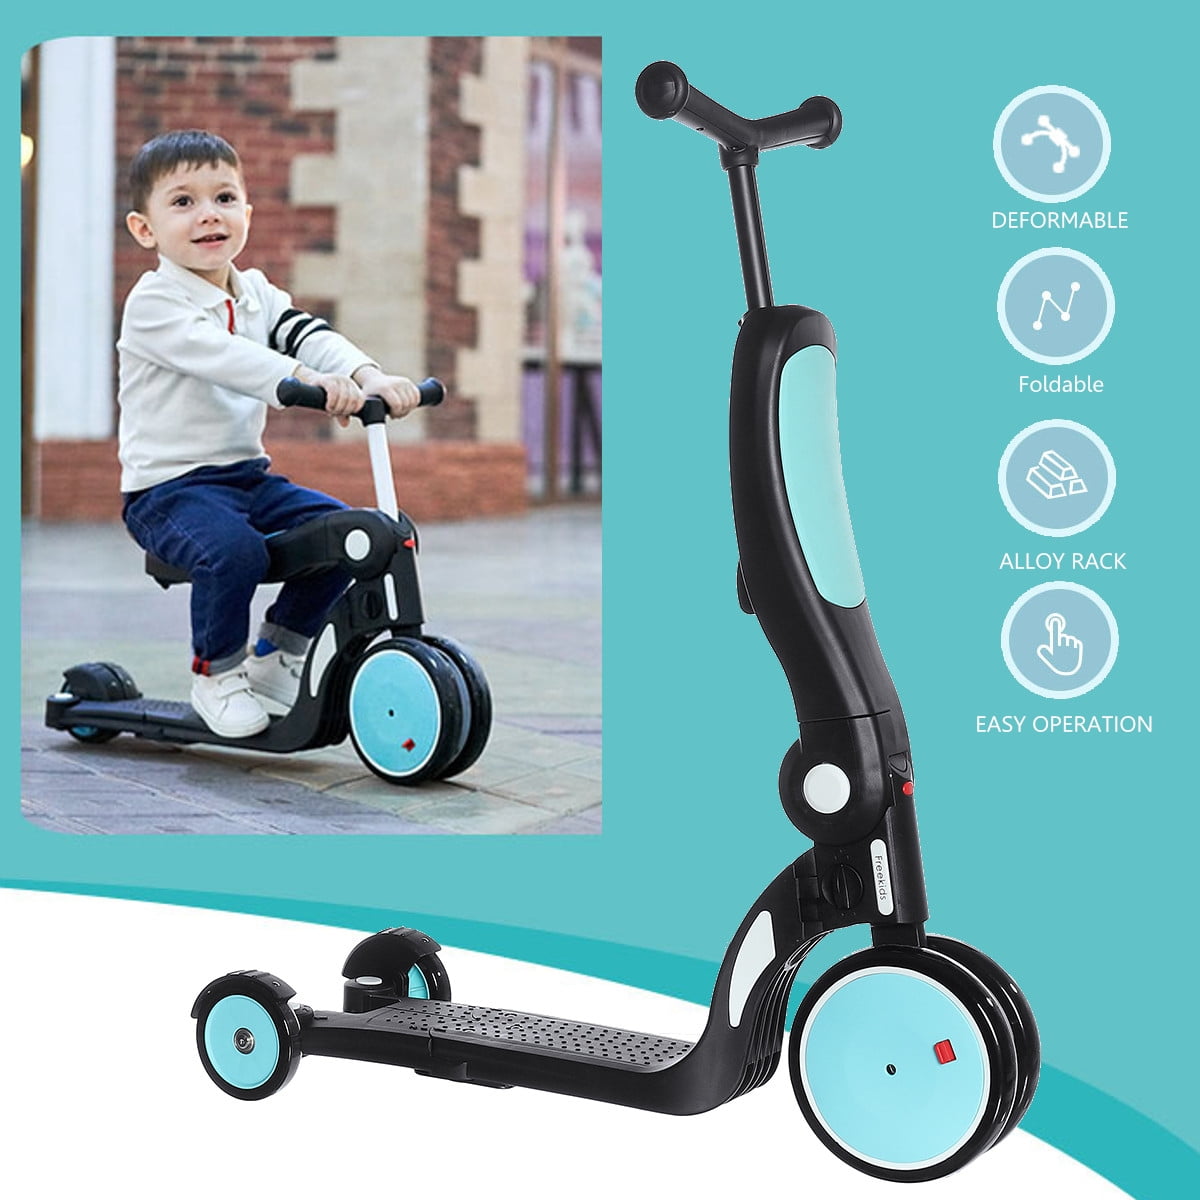 AKOZLIN 3 Wheel Scooters for Kids Kick Scooter Scooter trotinette enfant 4 roues with 3 Adjustable Height,Detachable Handlebar,PU Flashing Wheels Gift for Children from 3 to 12 Years Old Toddlers Girls & Boys 